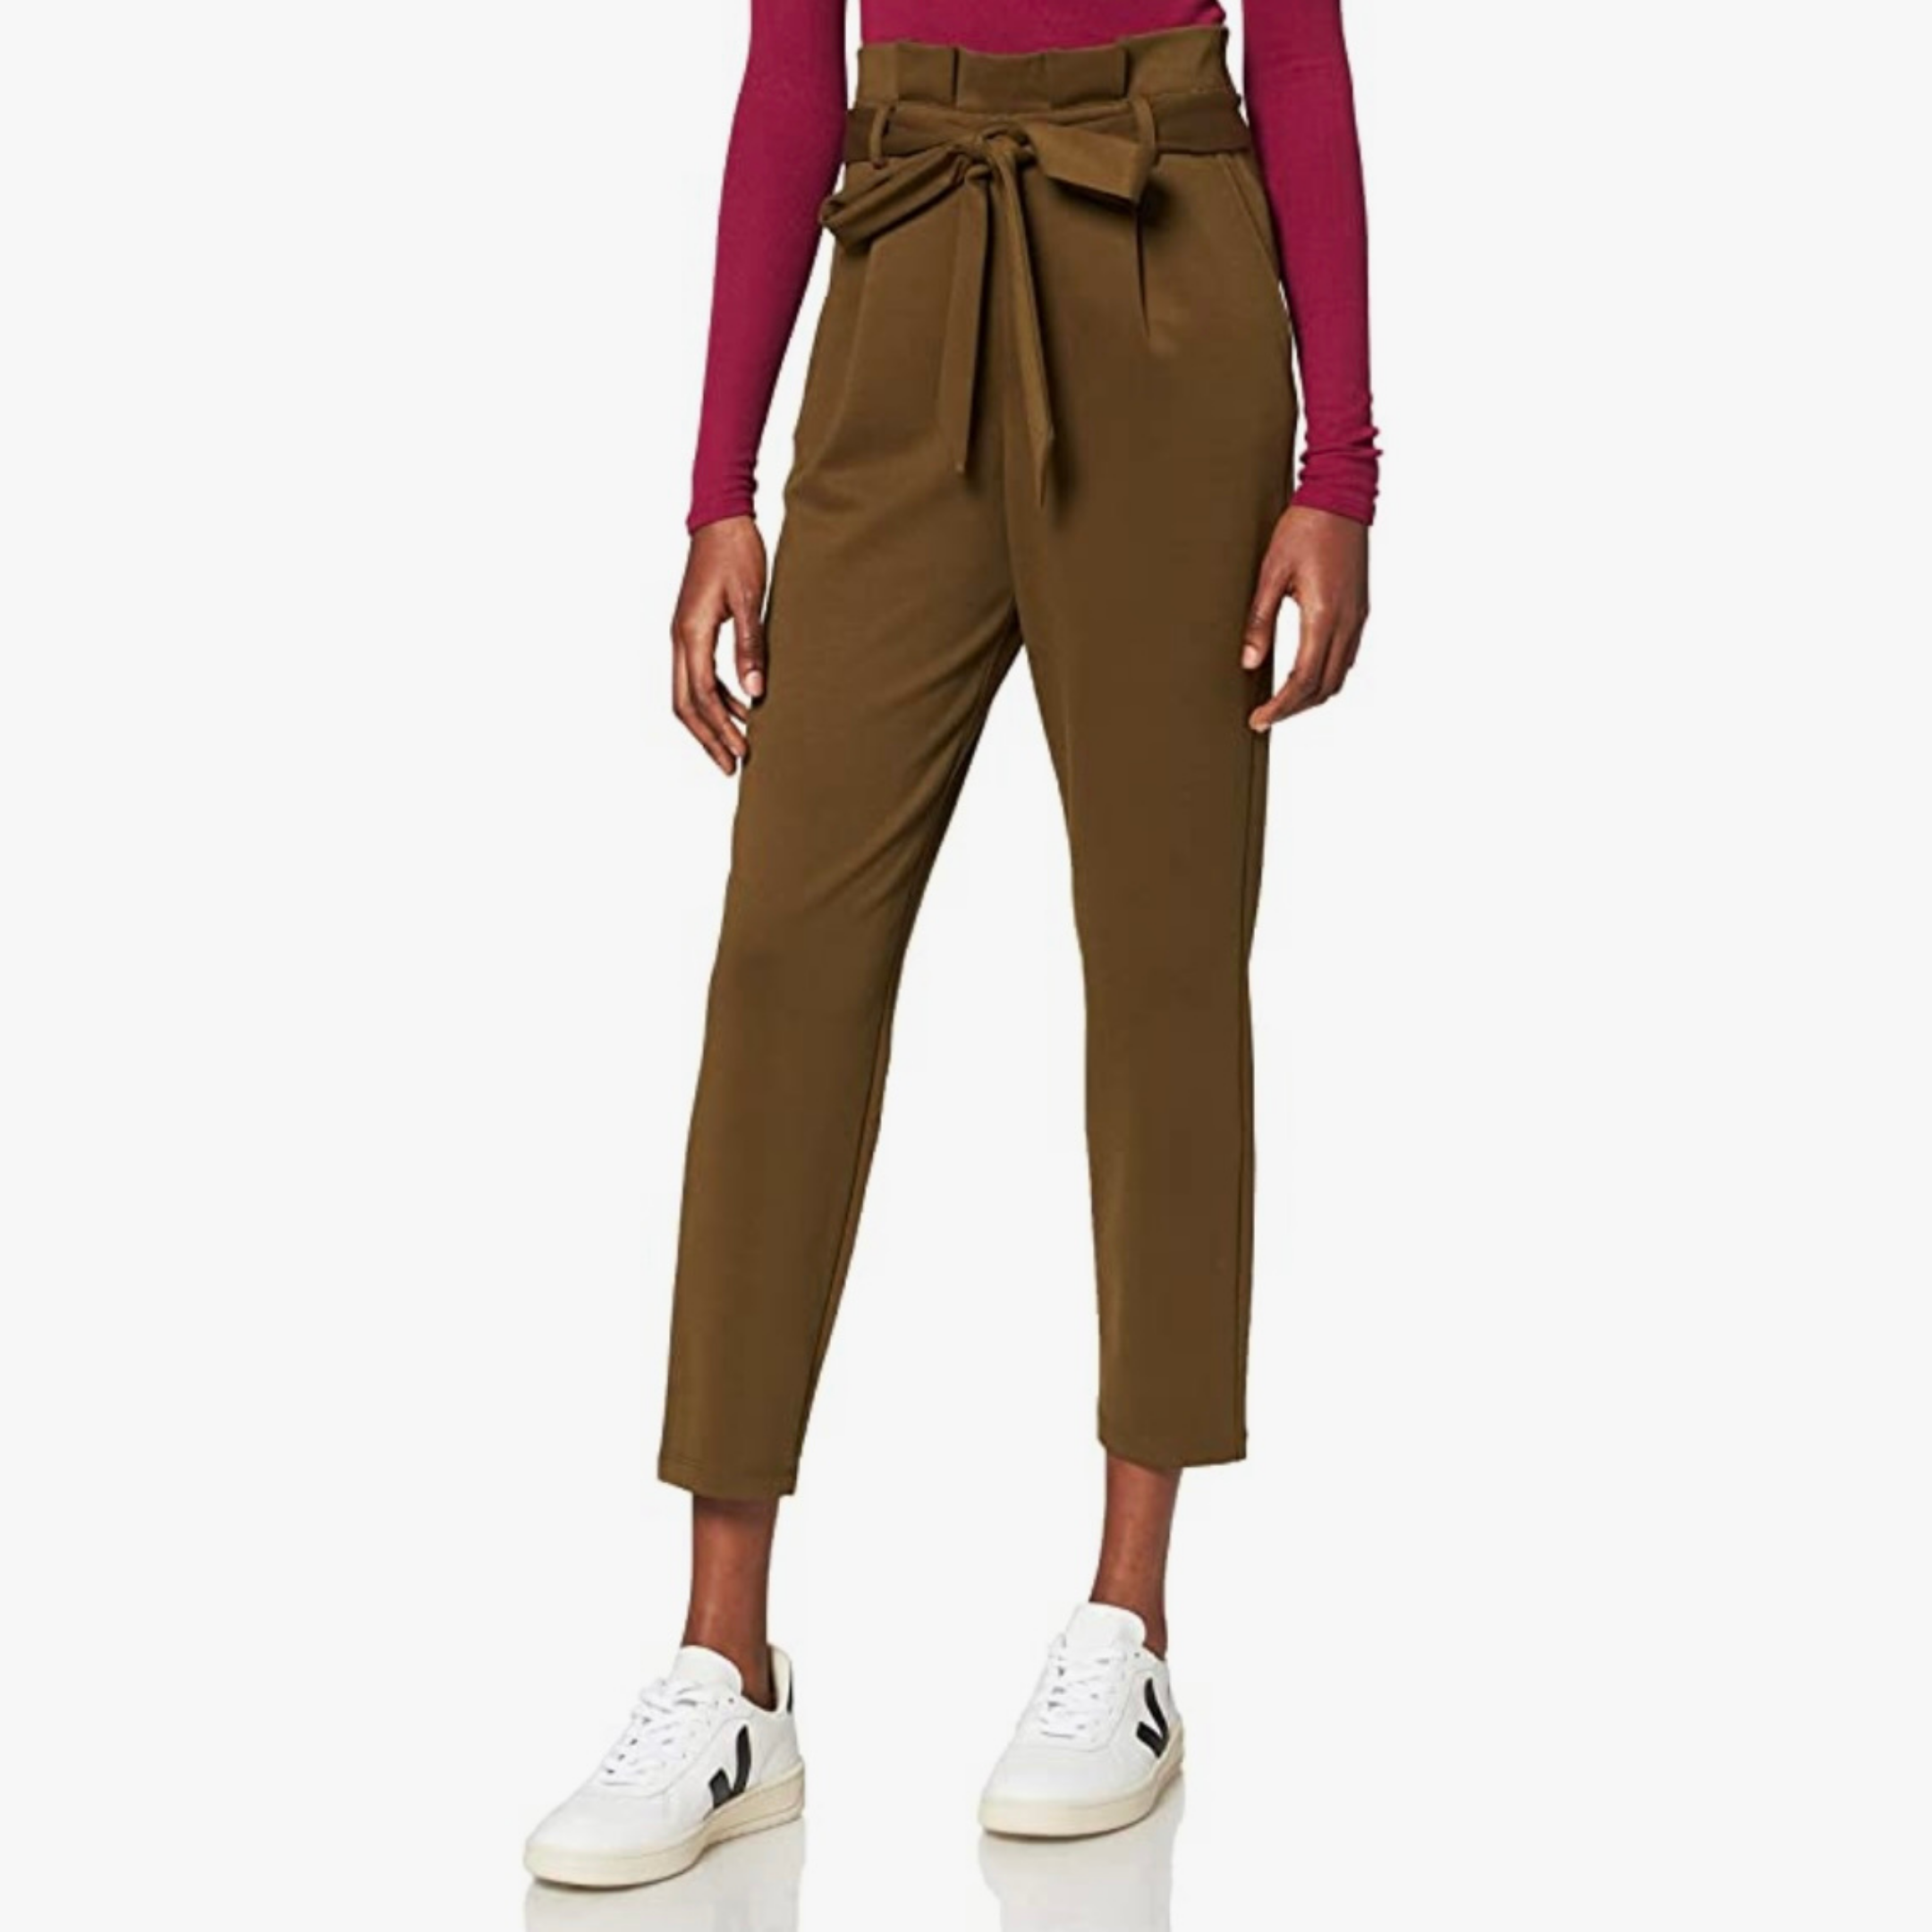 11 Stylish Trousers On Sale For Amazon Prime Day - Essence